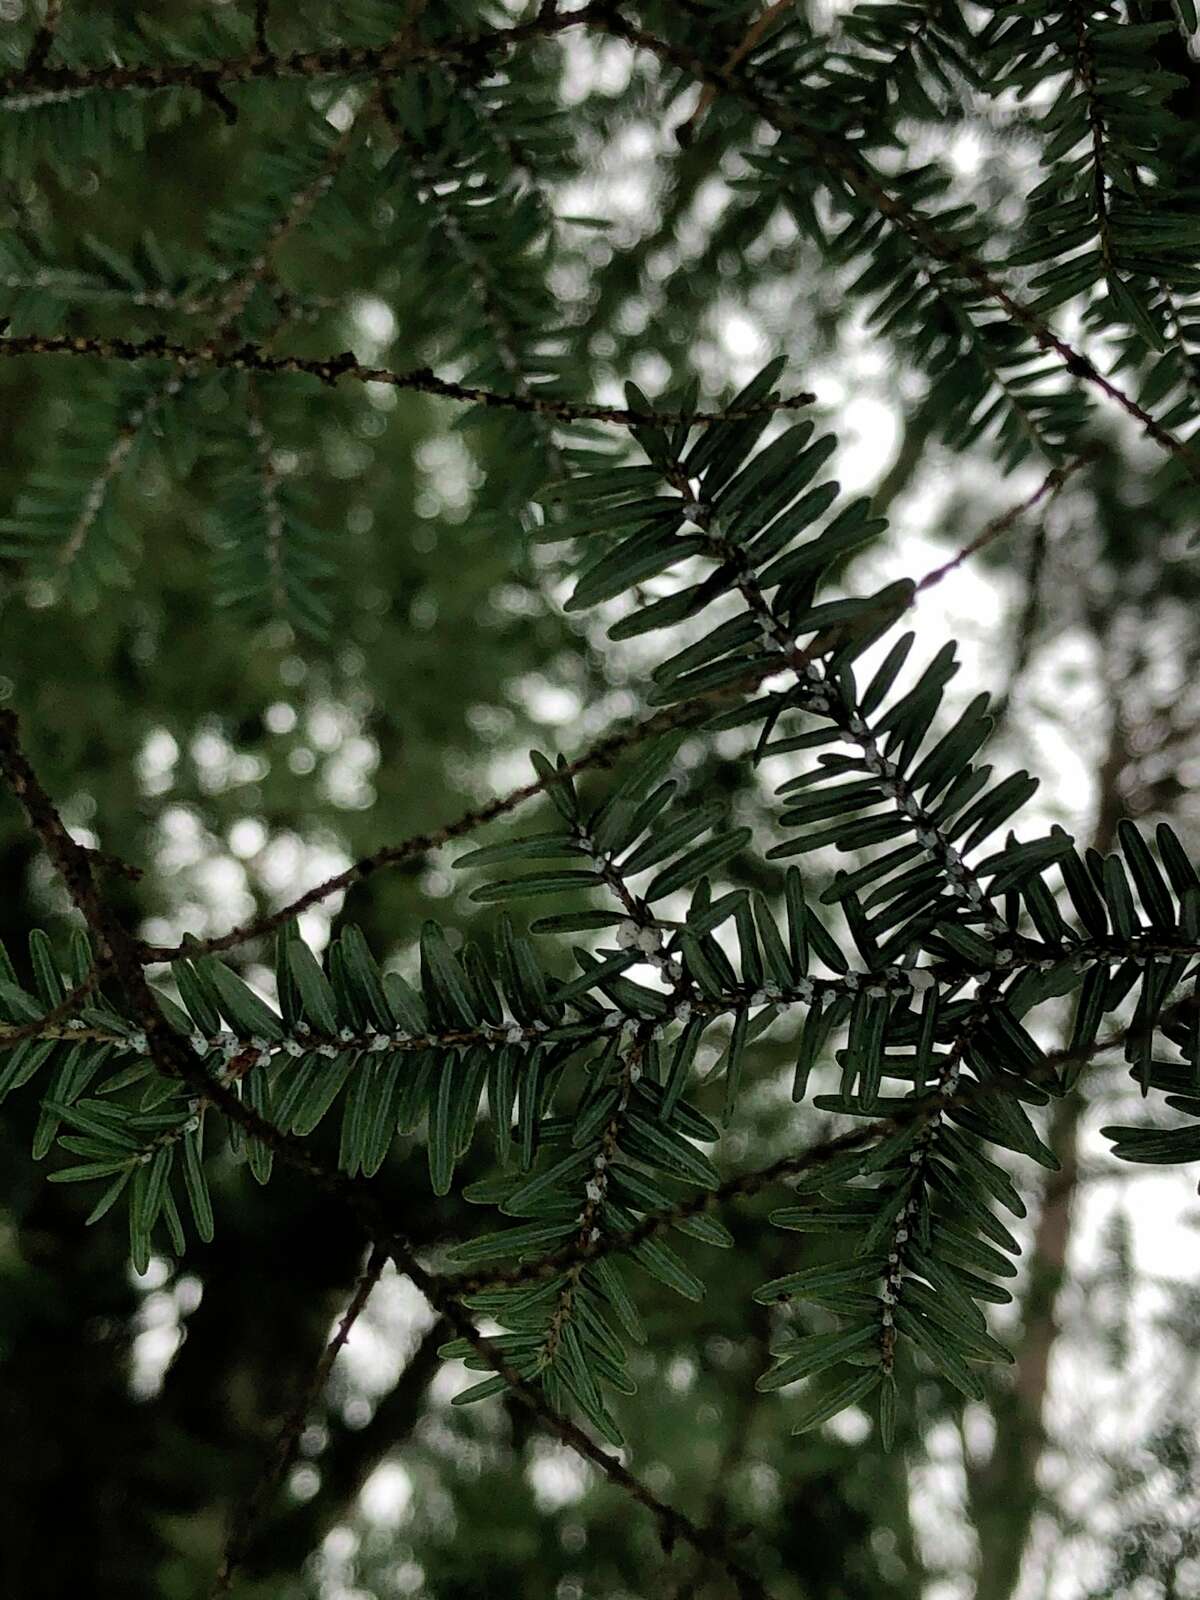 Hemlock wooly adelgid has been discovered in Benzie County. (Courtesy Photo)